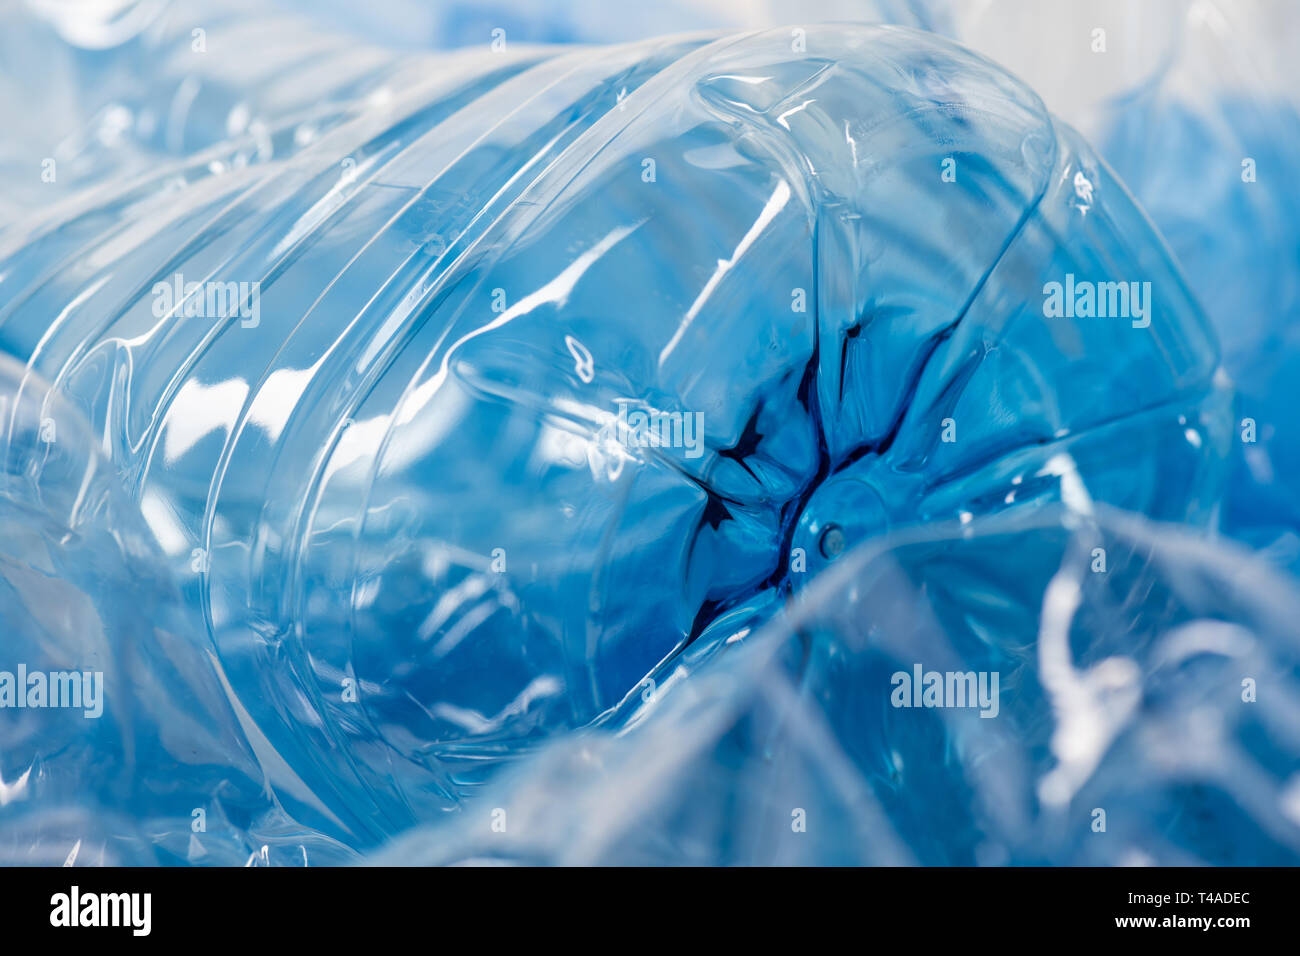 Clear transparent blue plastic containers being issue for nature and environment Stock Photo